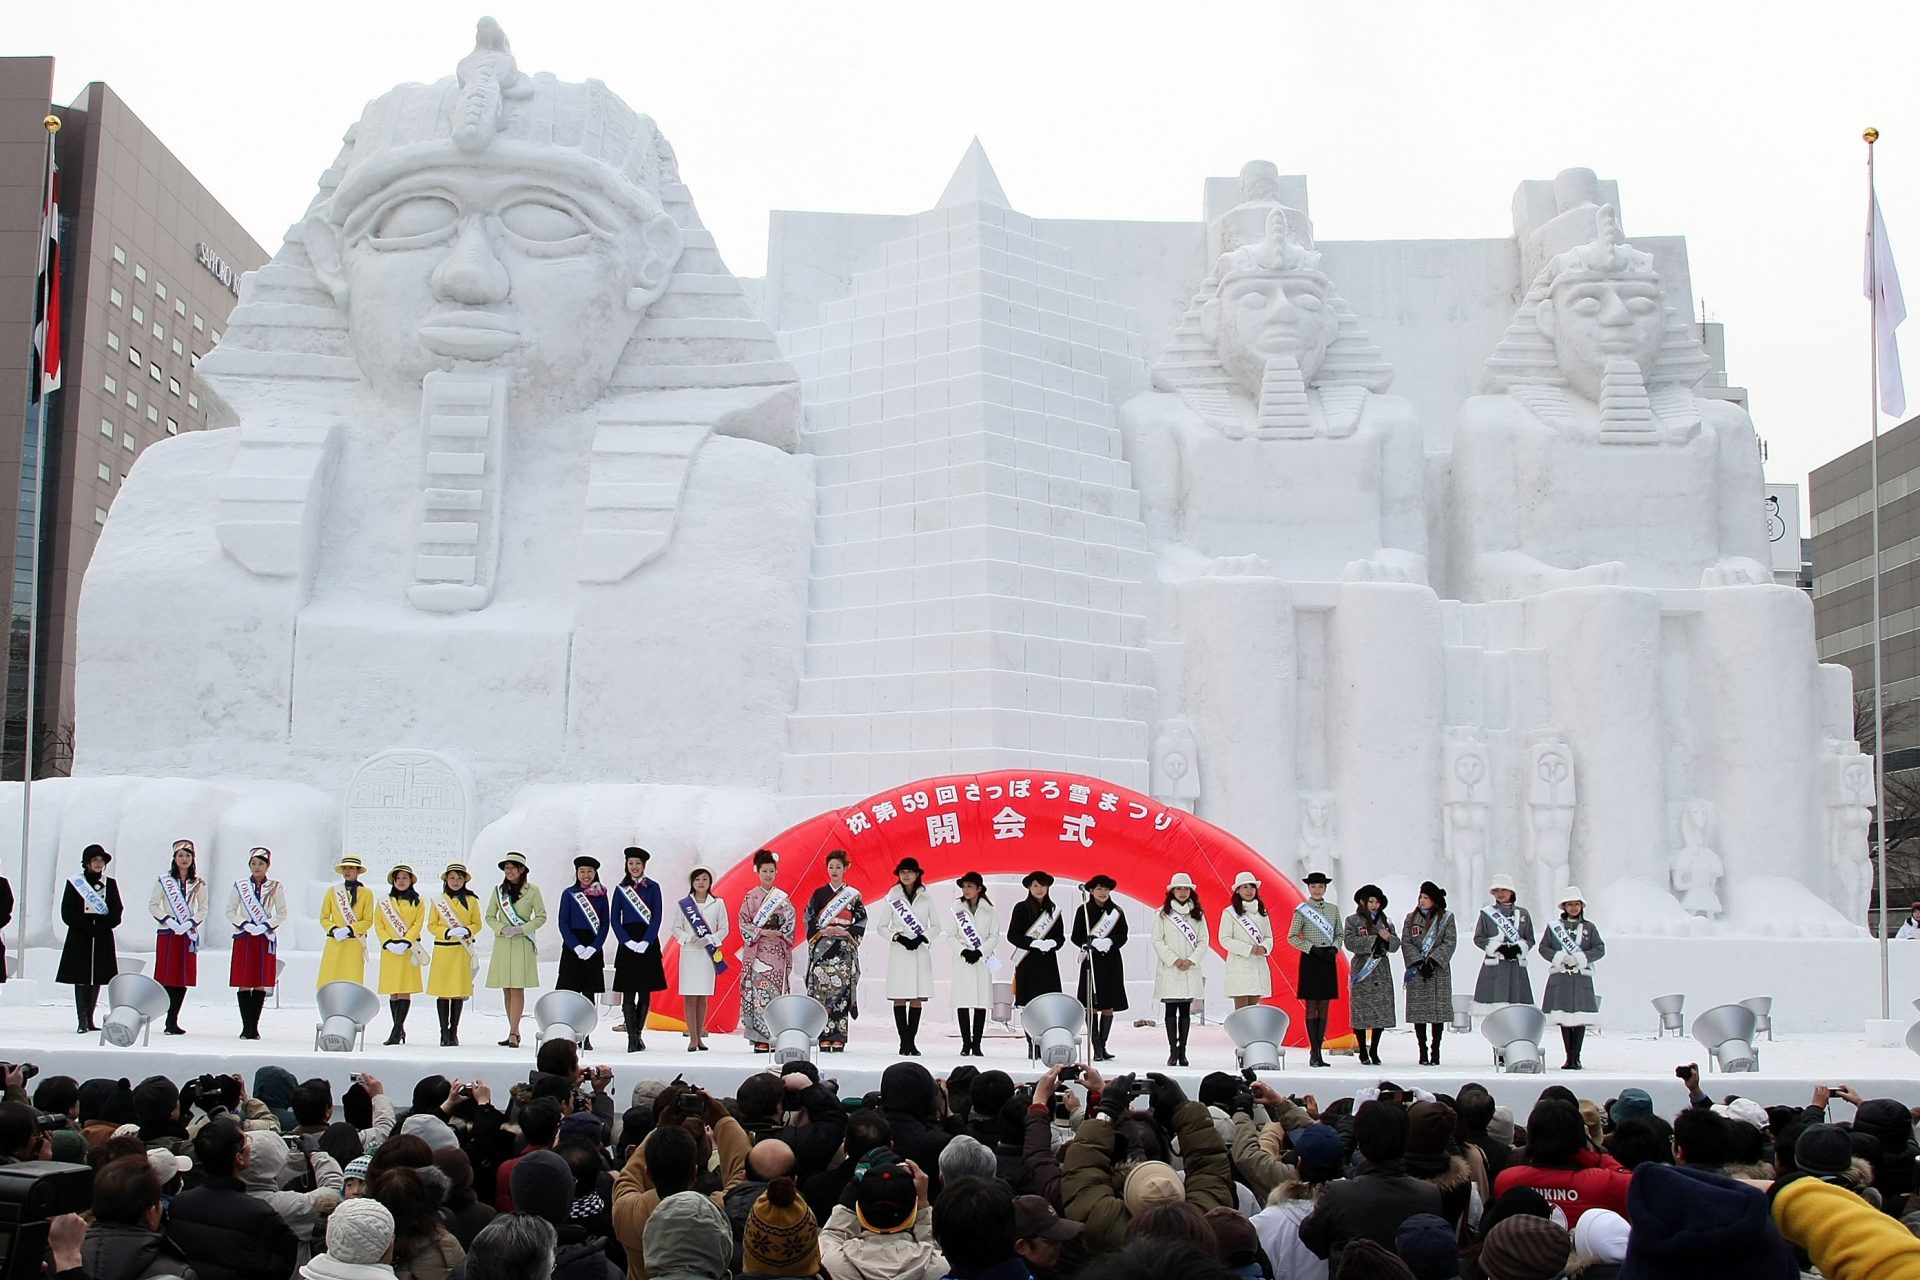 Miss Japan contestants gather in front of the pyramid